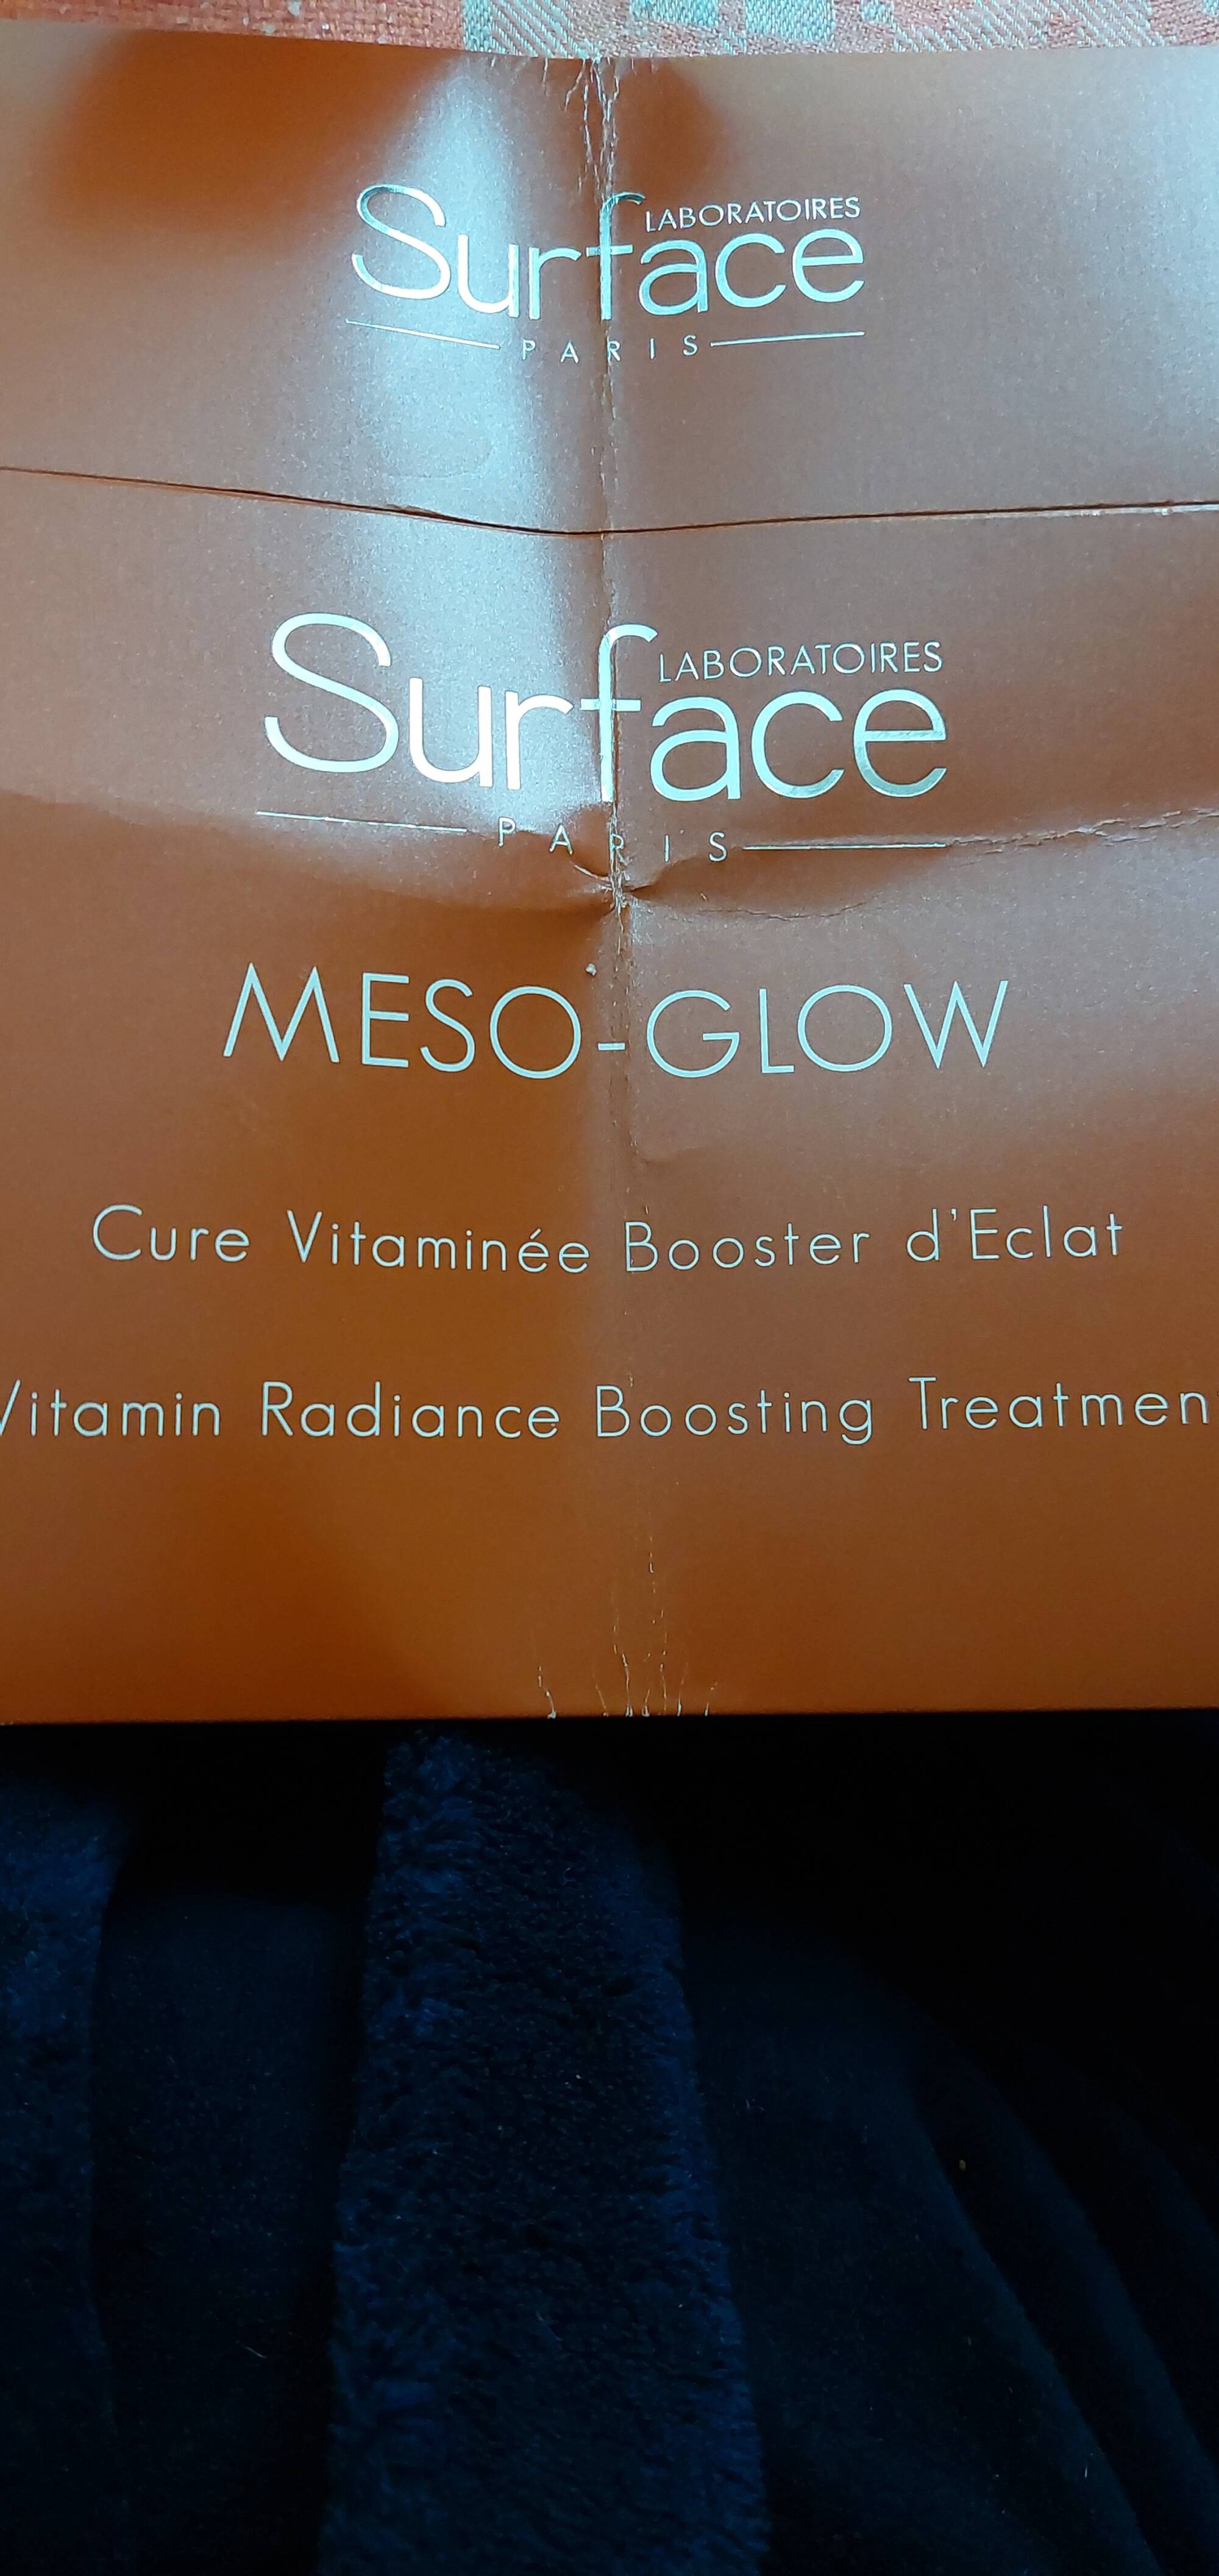 SURFACE - Meso-glow - Cure vitaminée booster d'eclat